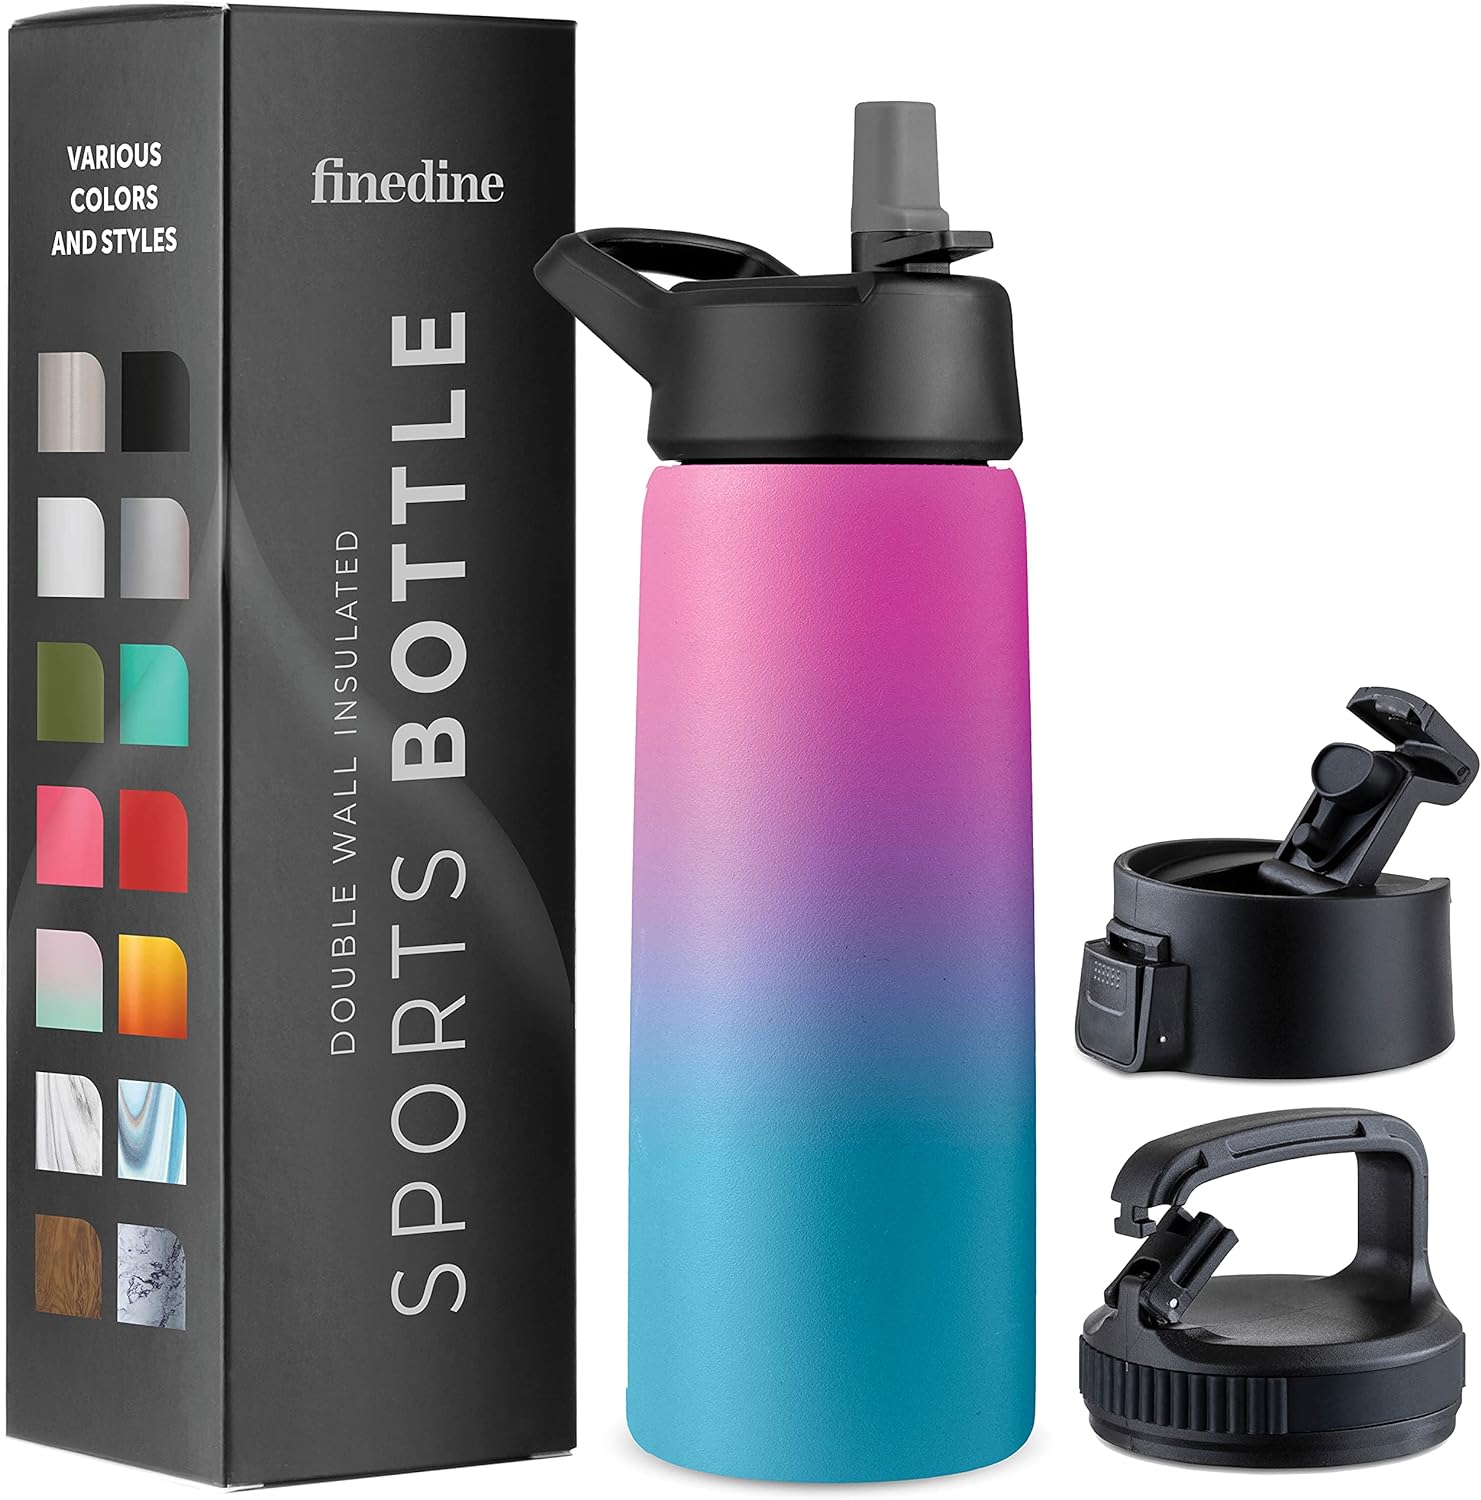 FineDine Insulated Water Bottles with Straw - 25 Oz Stainless Steel Metal Water Bottle W/ 3 Lids - Reusable for Travel, Camping, Bike, Sports - Pacific Blue Rose Blend